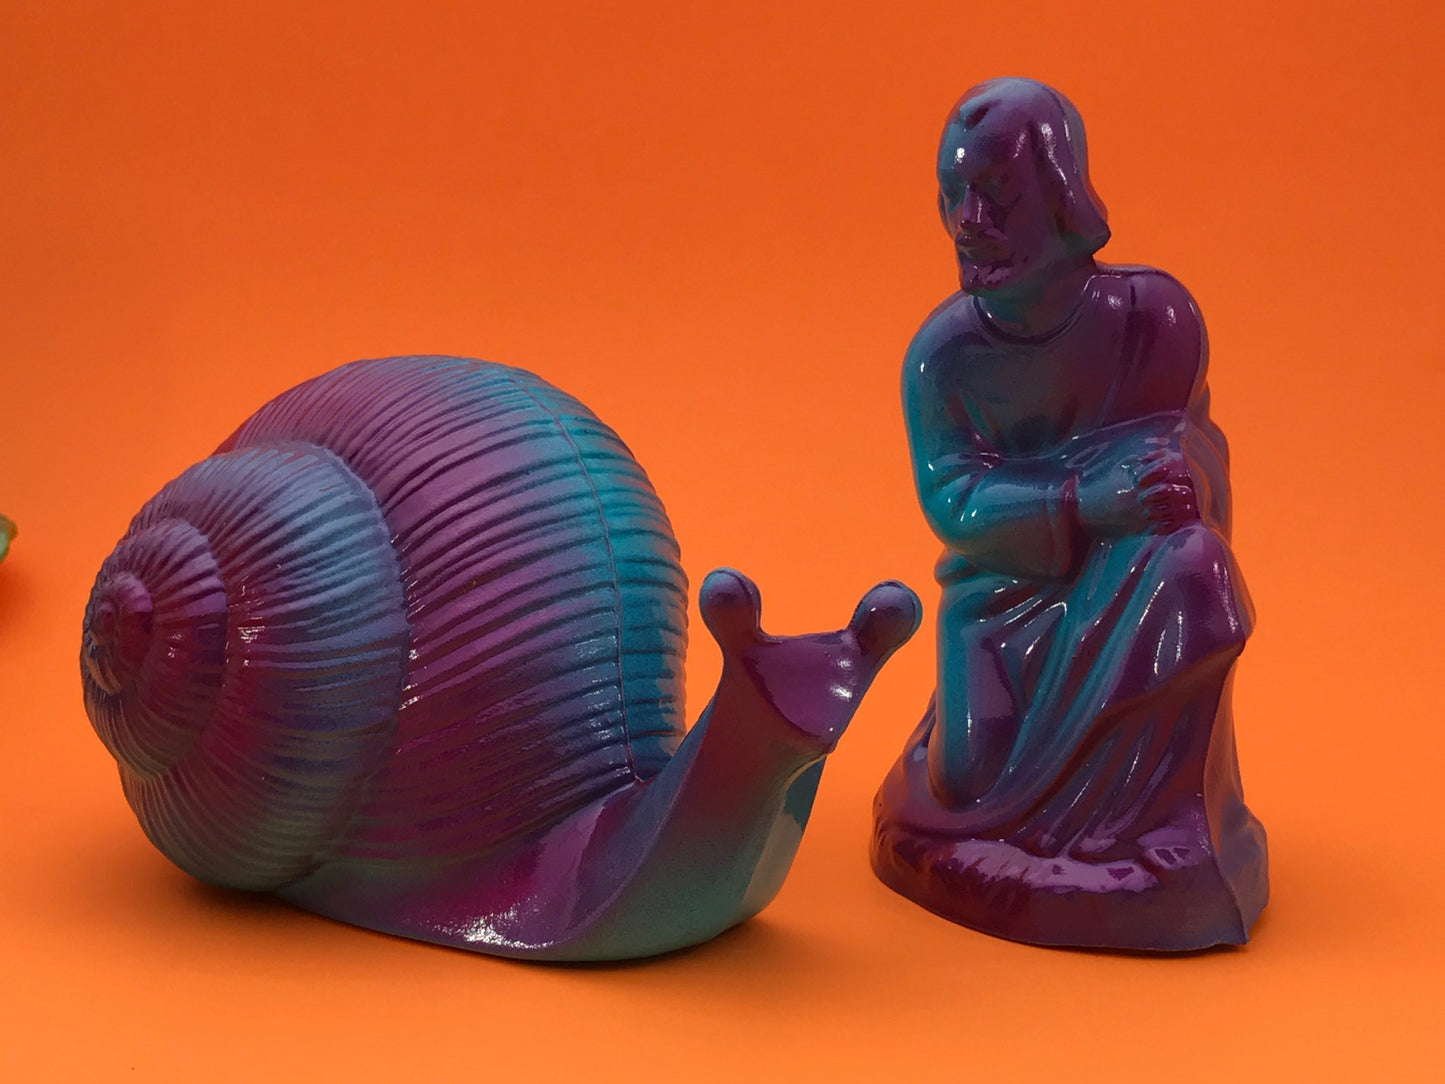 Joseph and his Snail (purple and blue)